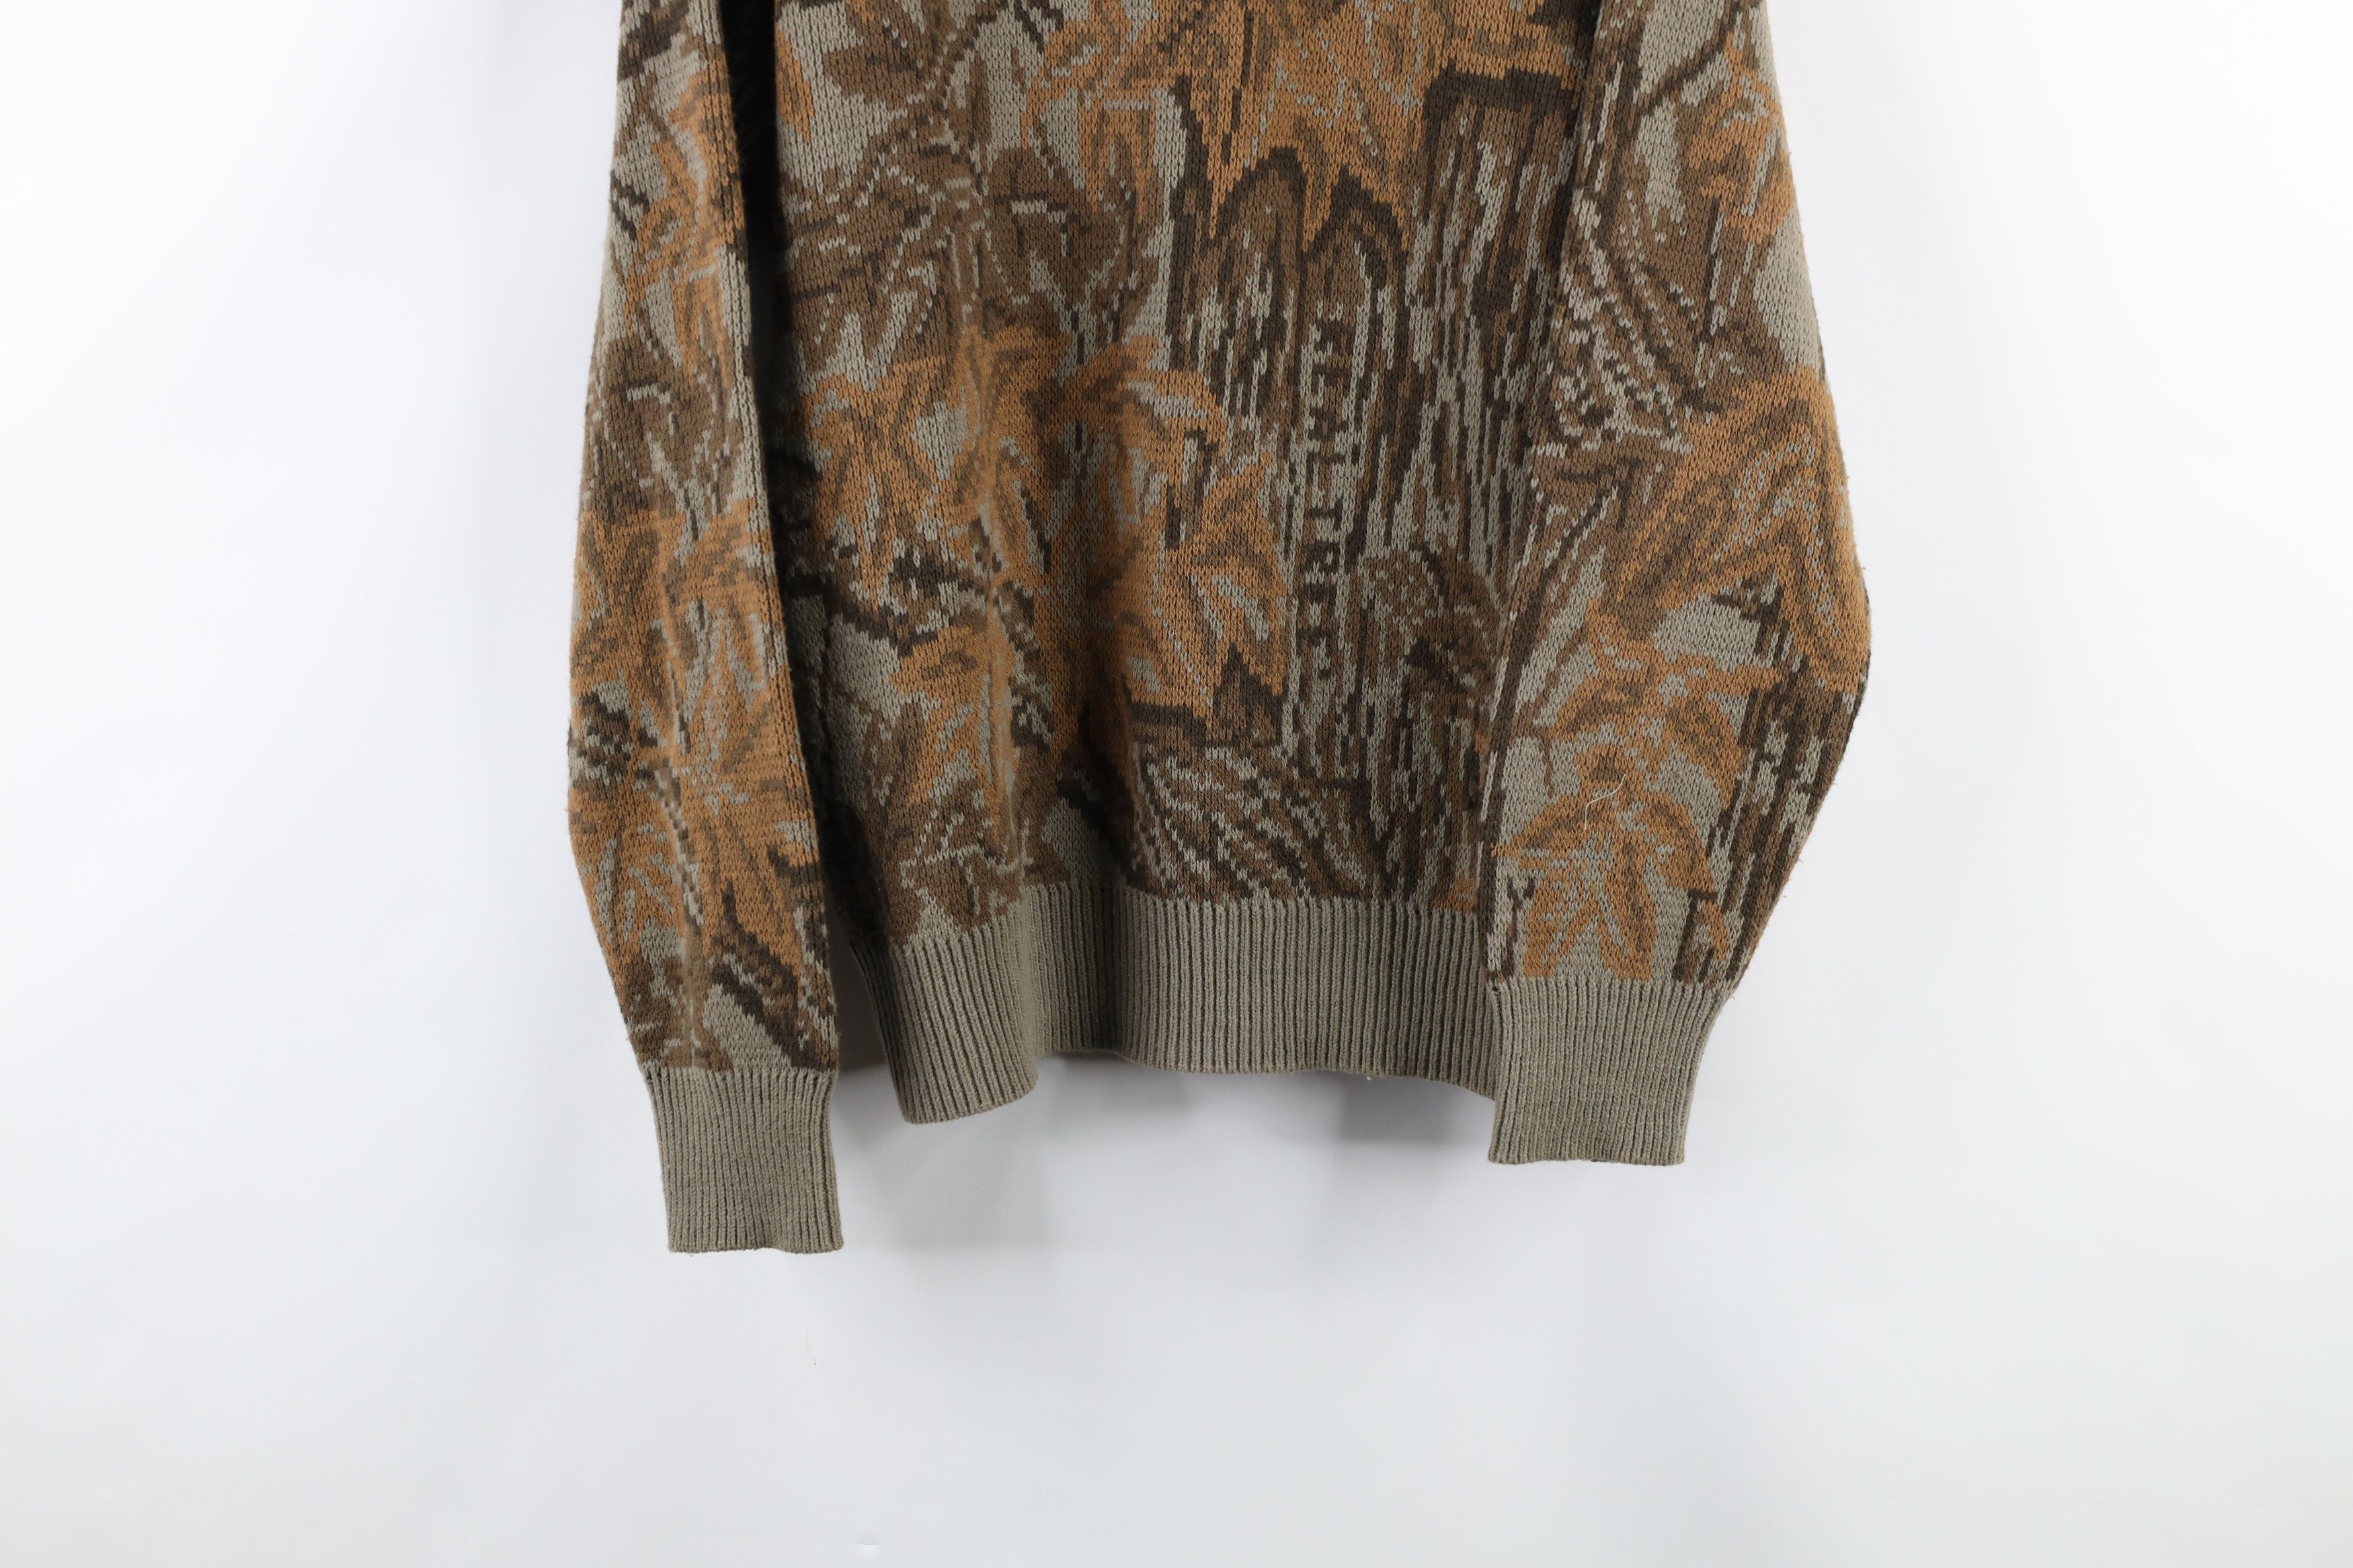 Vintage Vintage 90s Streetwear Realtree Camouflage Henley Sweater Size US M / EU 48-50 / 2 - 7 Preview